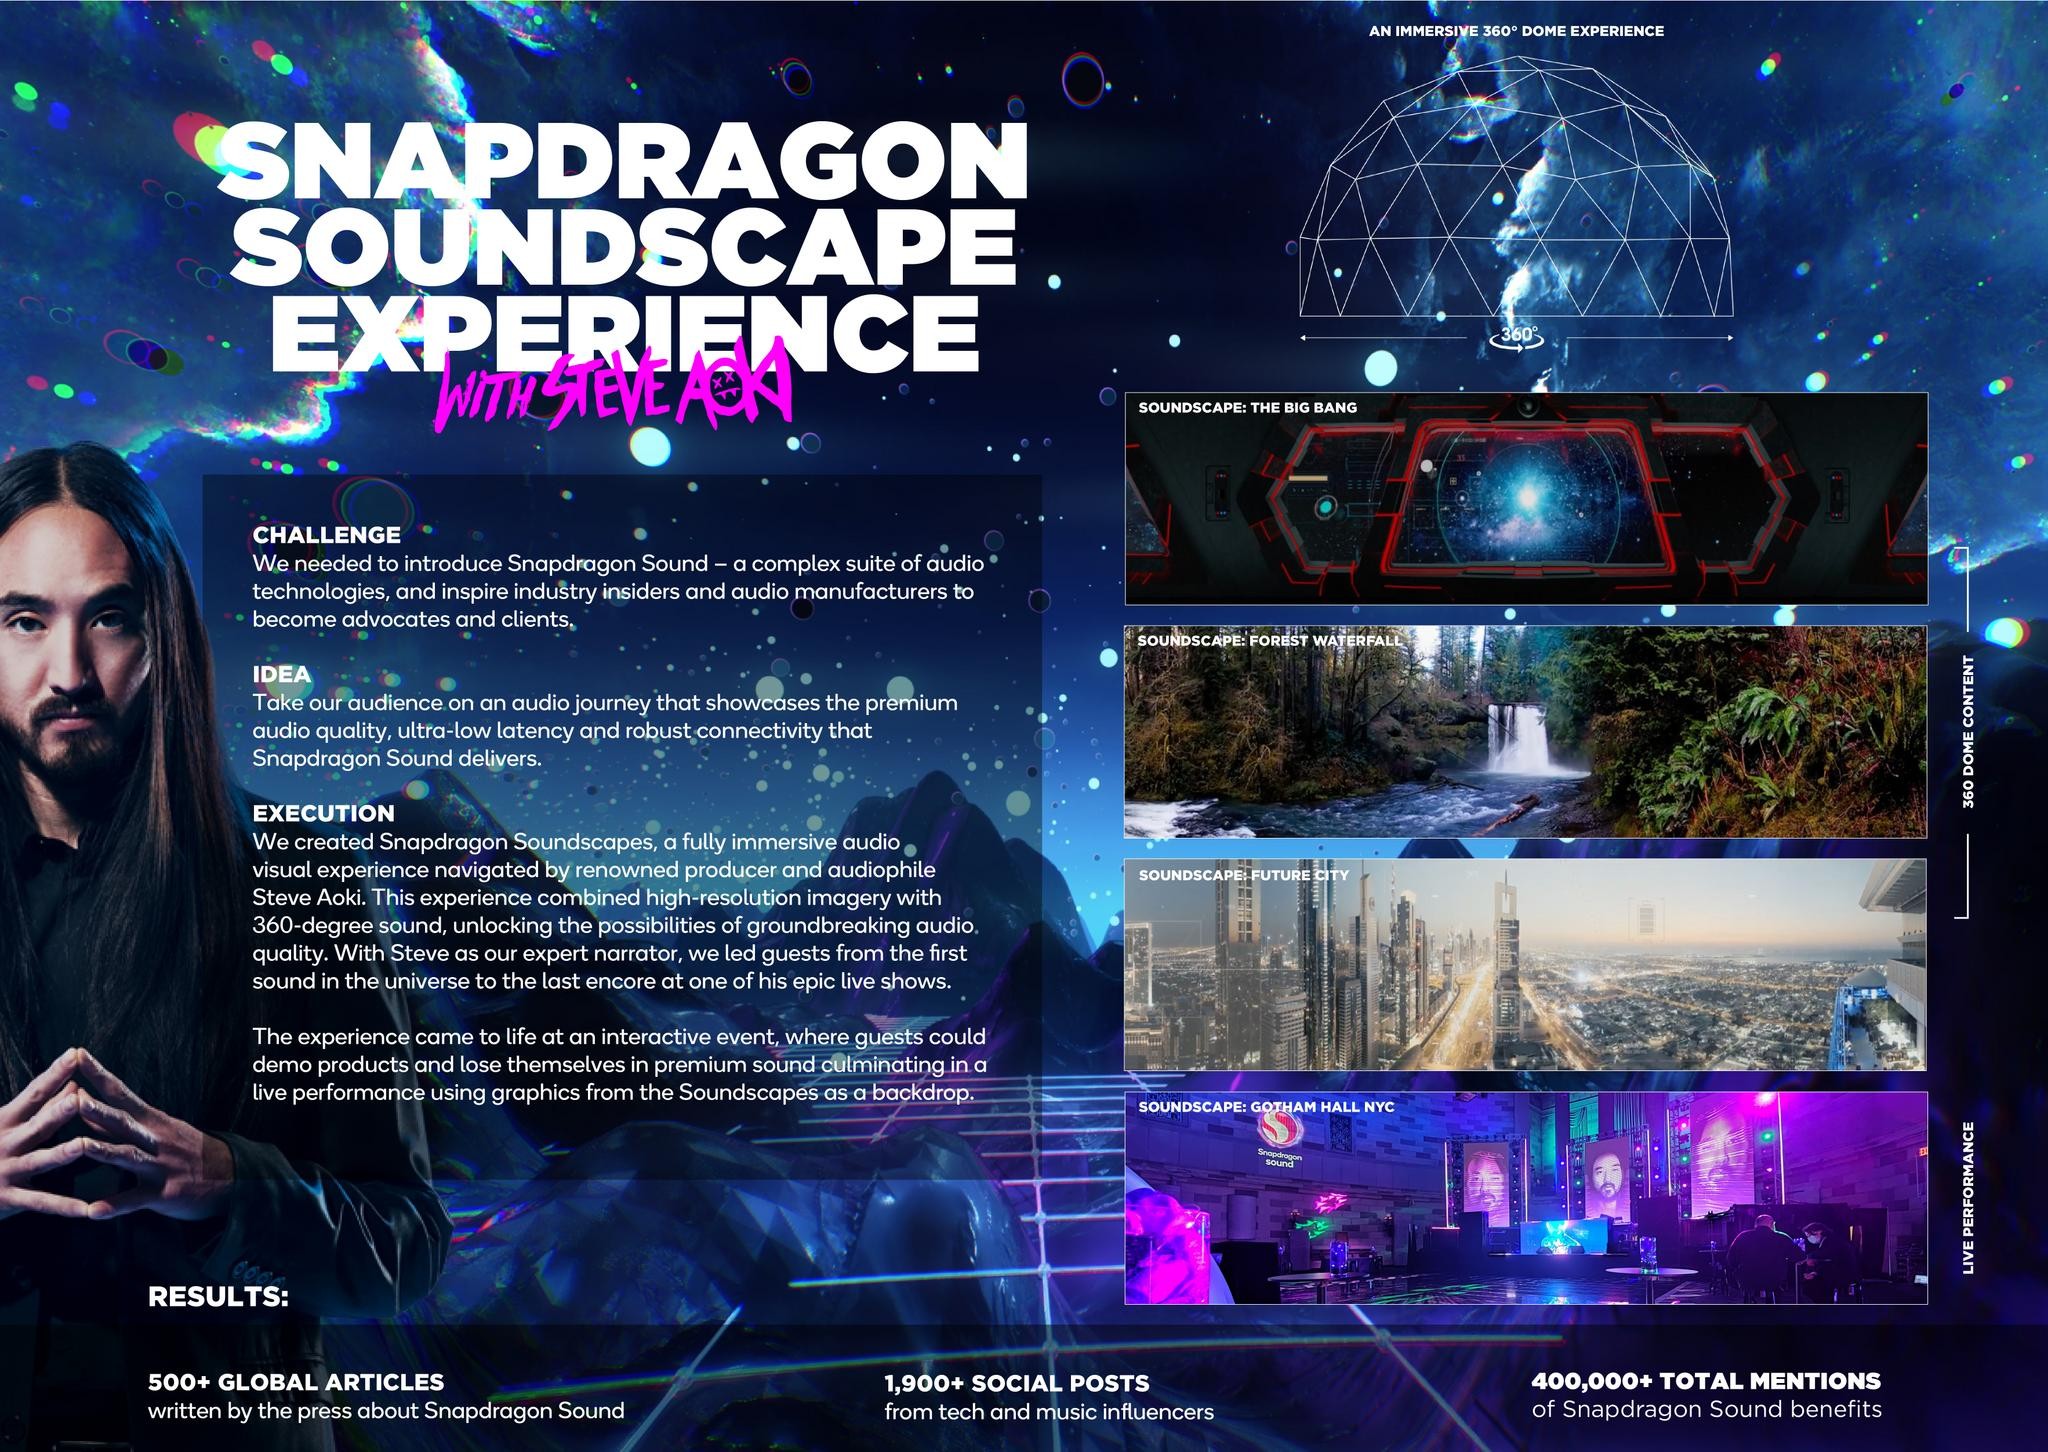 Snapdragon Soundscape Experience with Steve Aoki